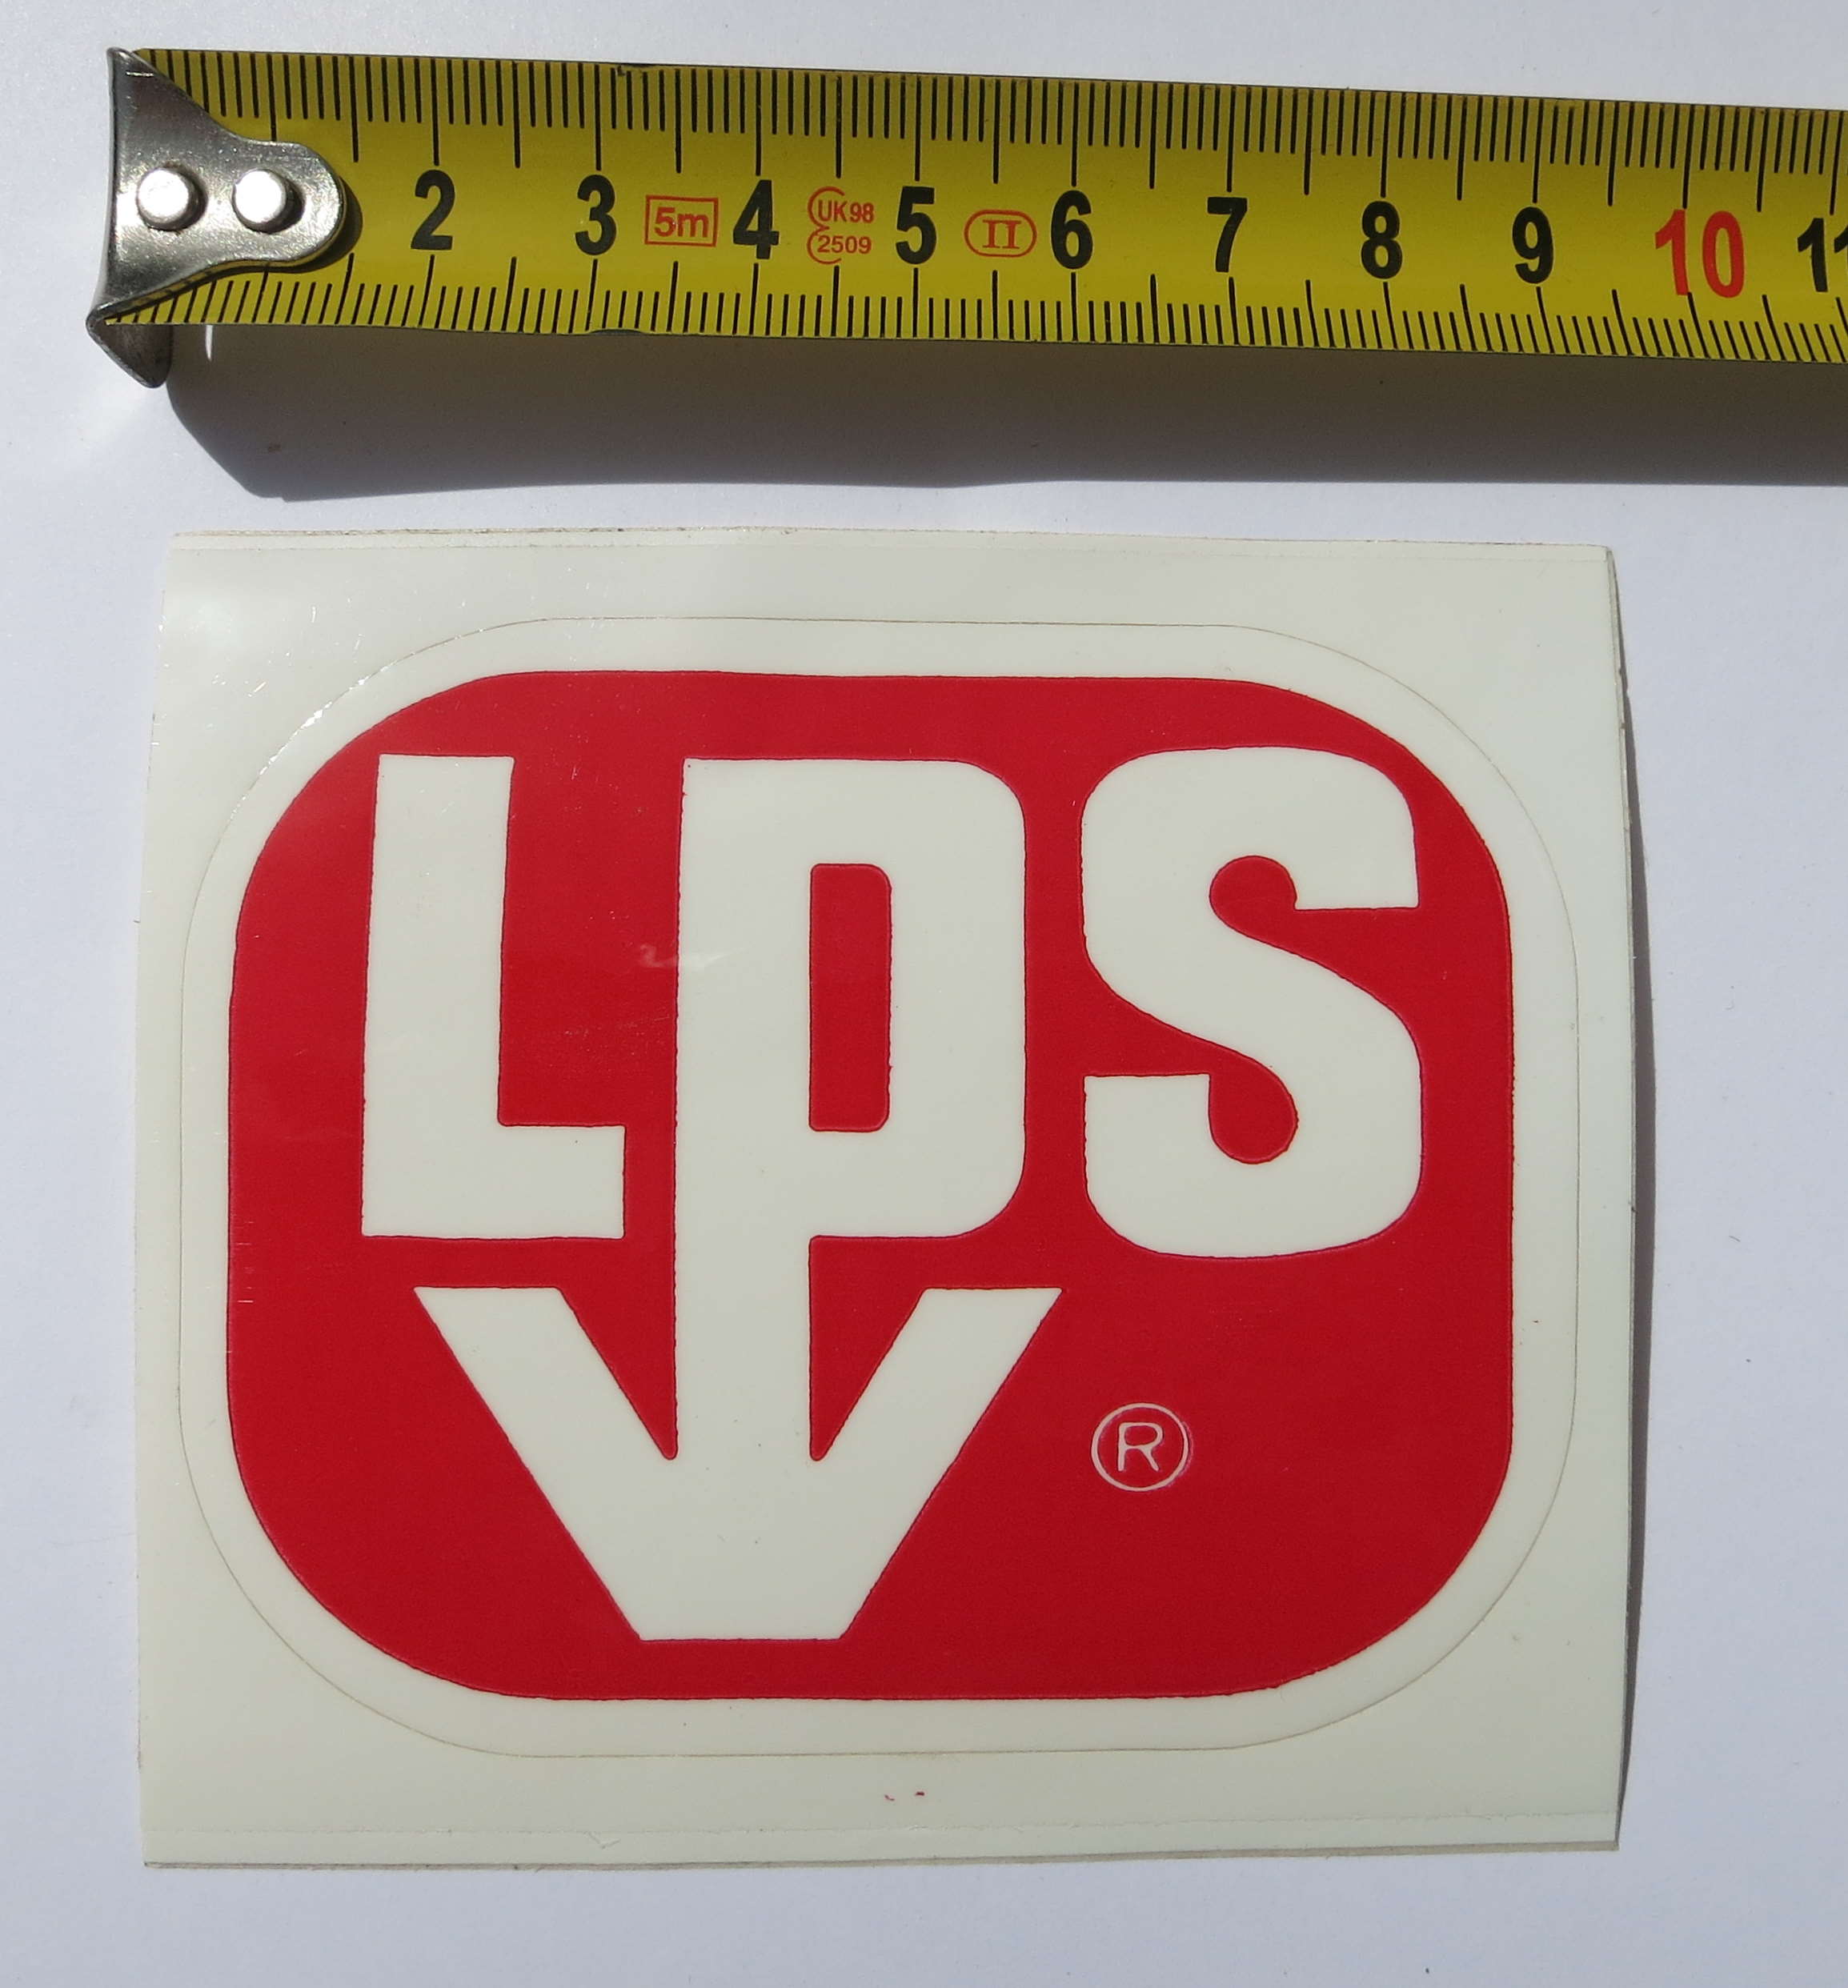 Original LPS Sticker from the early 70s